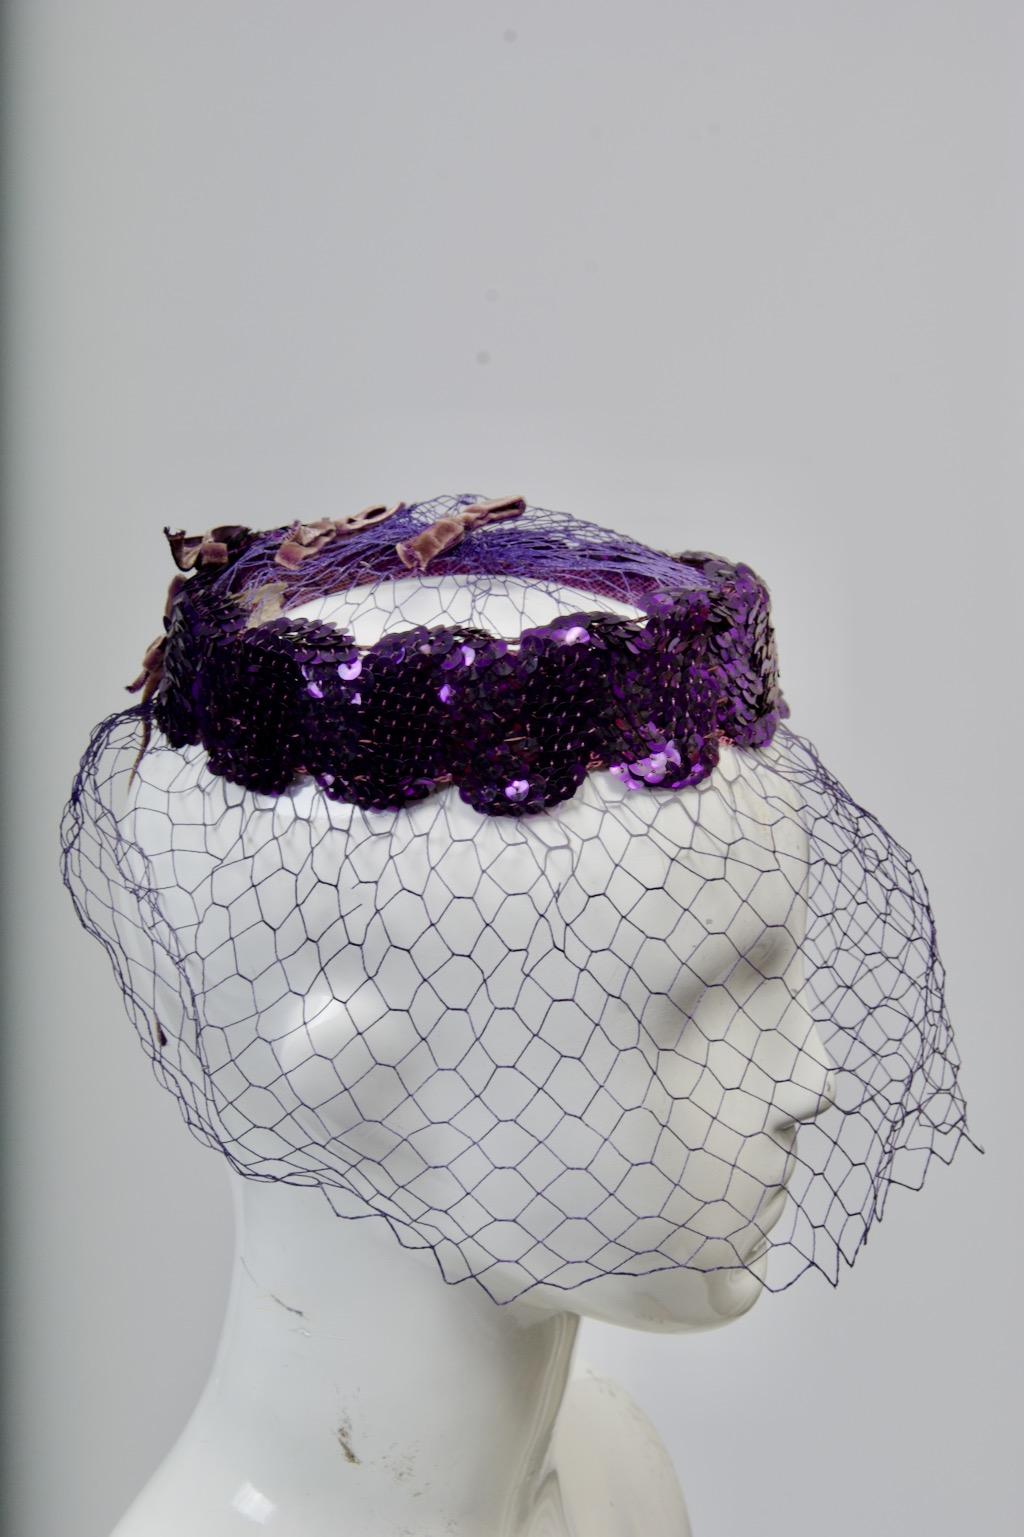 c.1950s pillbox-shaped headpiece with open crown and veil, the body composed of purple sequins in a serpentine design. Small velvet bows adorn the crown and back.